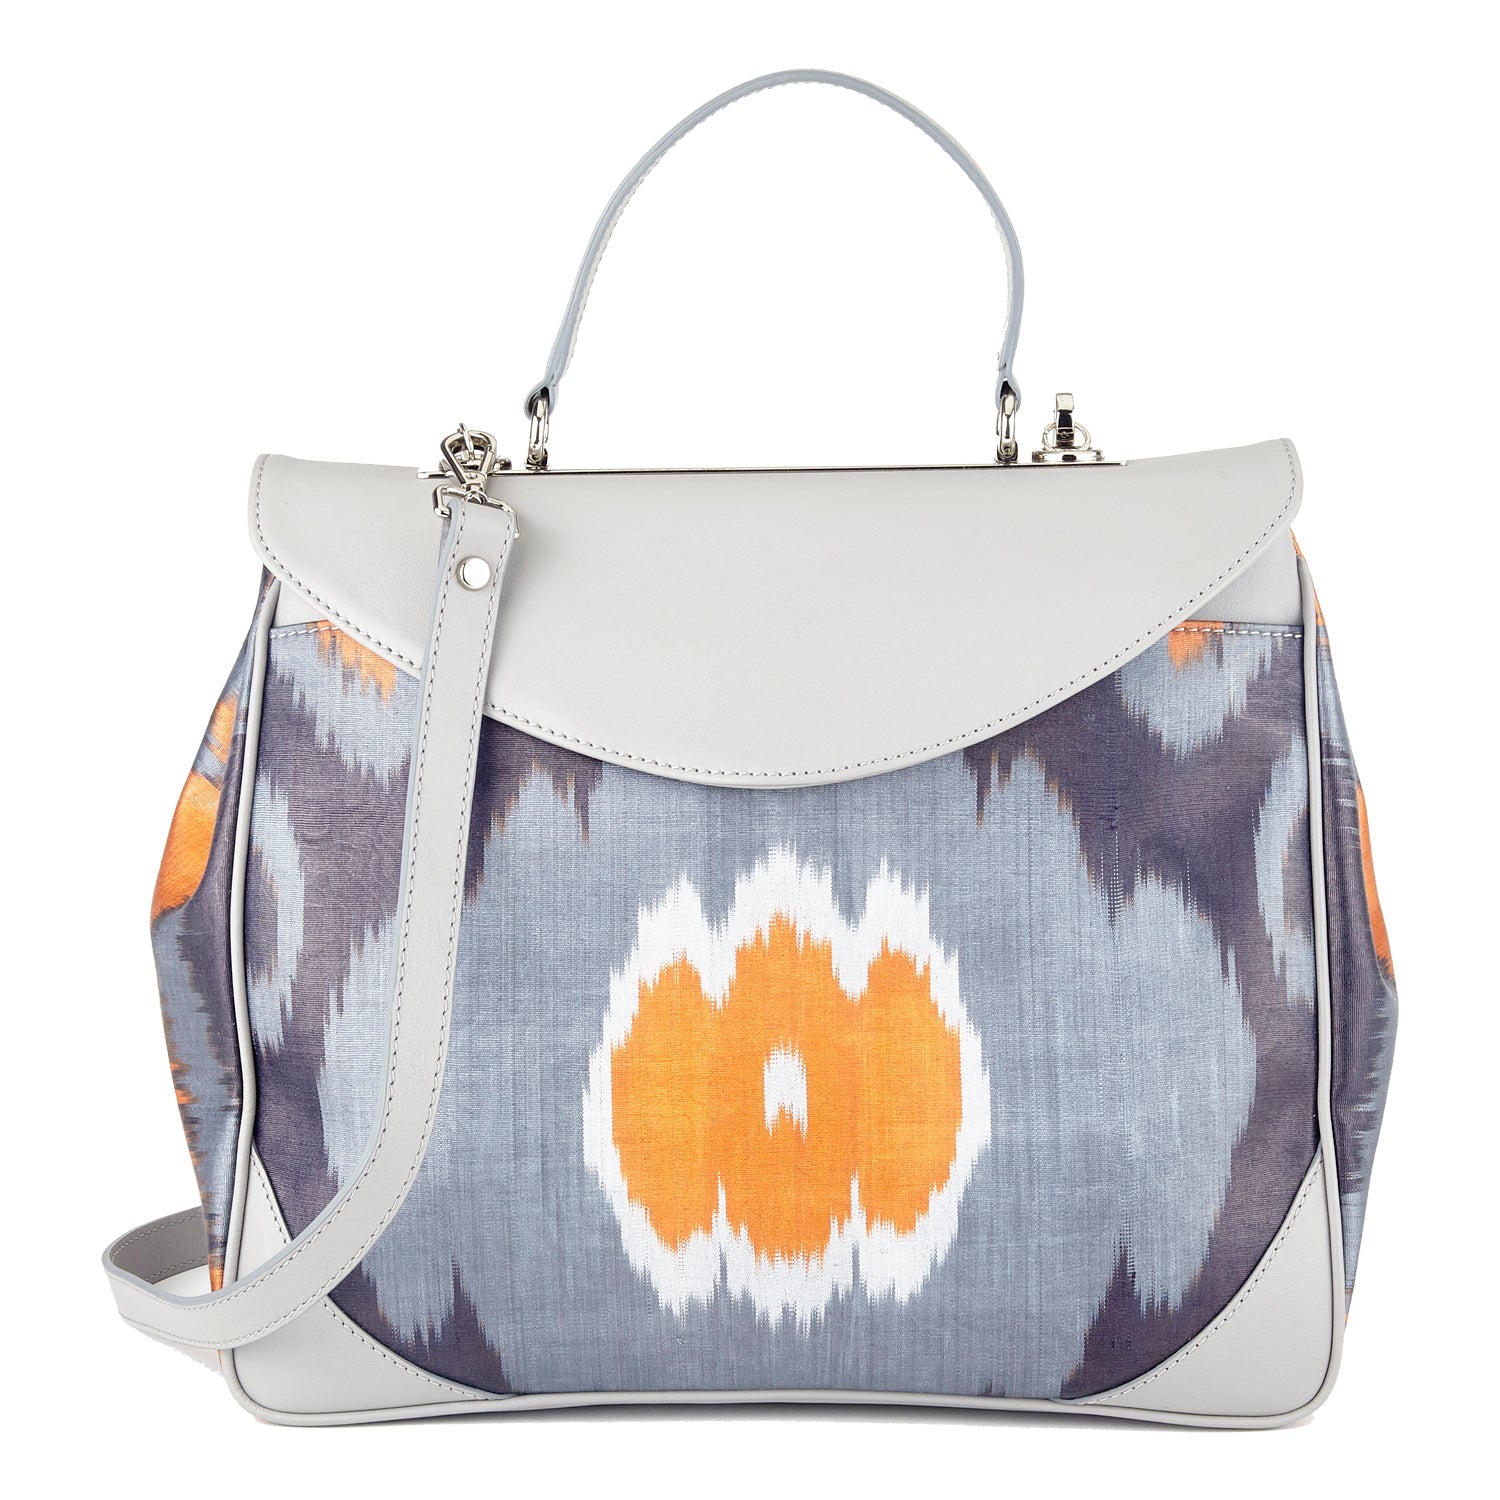 Acacia Sustainable Handmade Leather and Ikat Floral Tote Bag- Grey - SJW BAGS LONDON